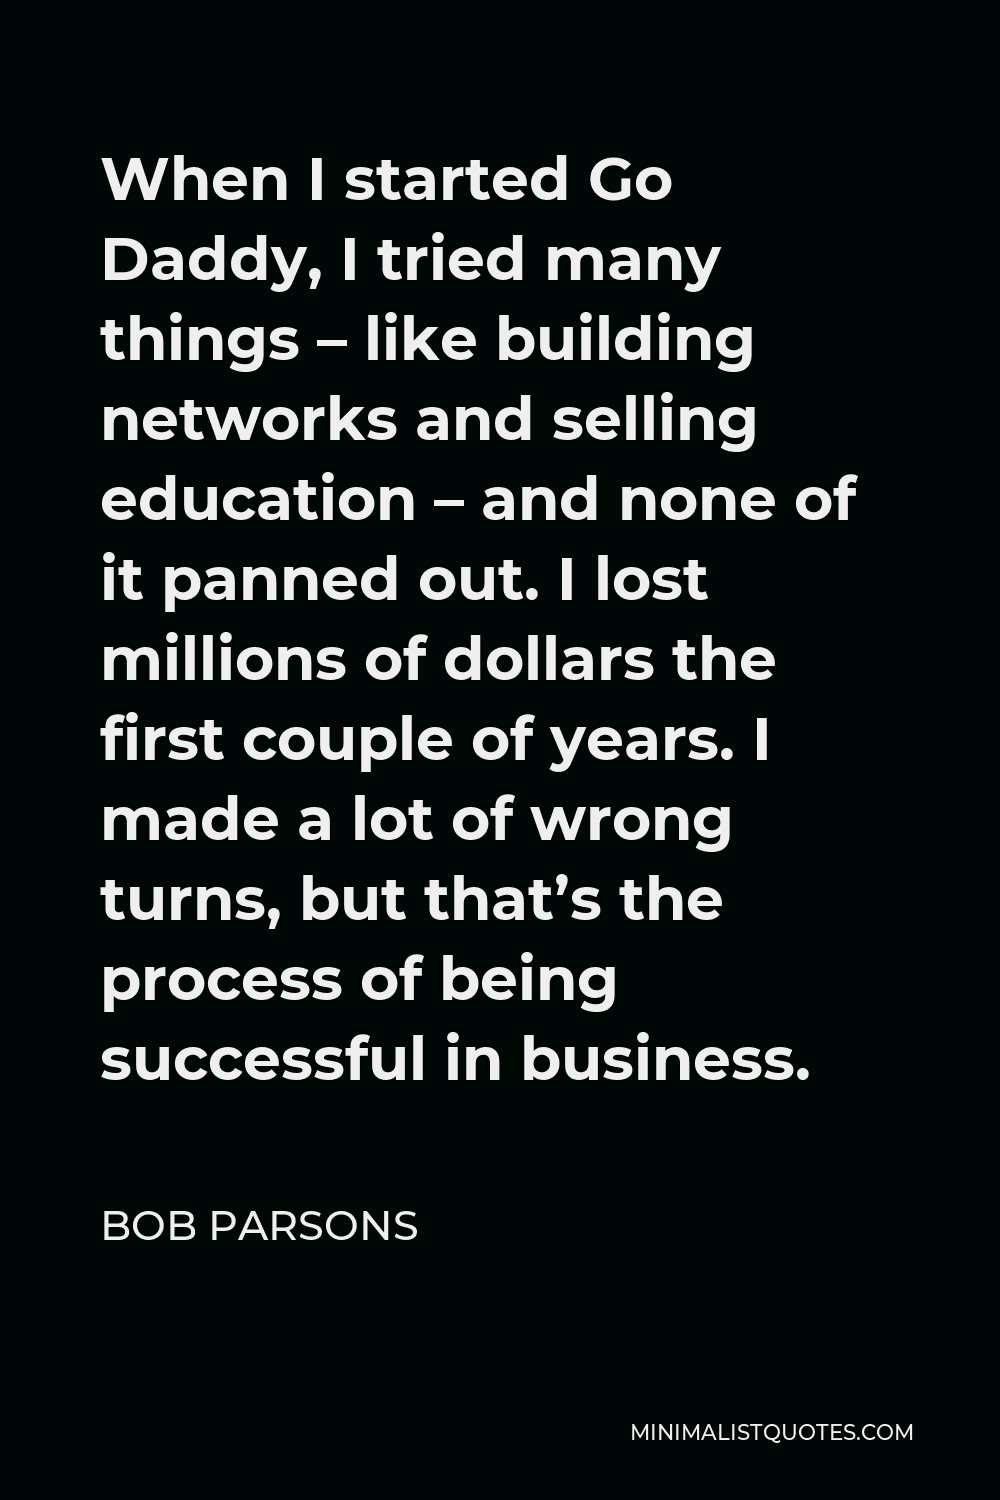 Bob Parsons Quote - When I started Go Daddy, I tried many things – like building networks and selling education – and none of it panned out. I lost millions of dollars the first couple of years. I made a lot of wrong turns, but that’s the process of being successful in business.